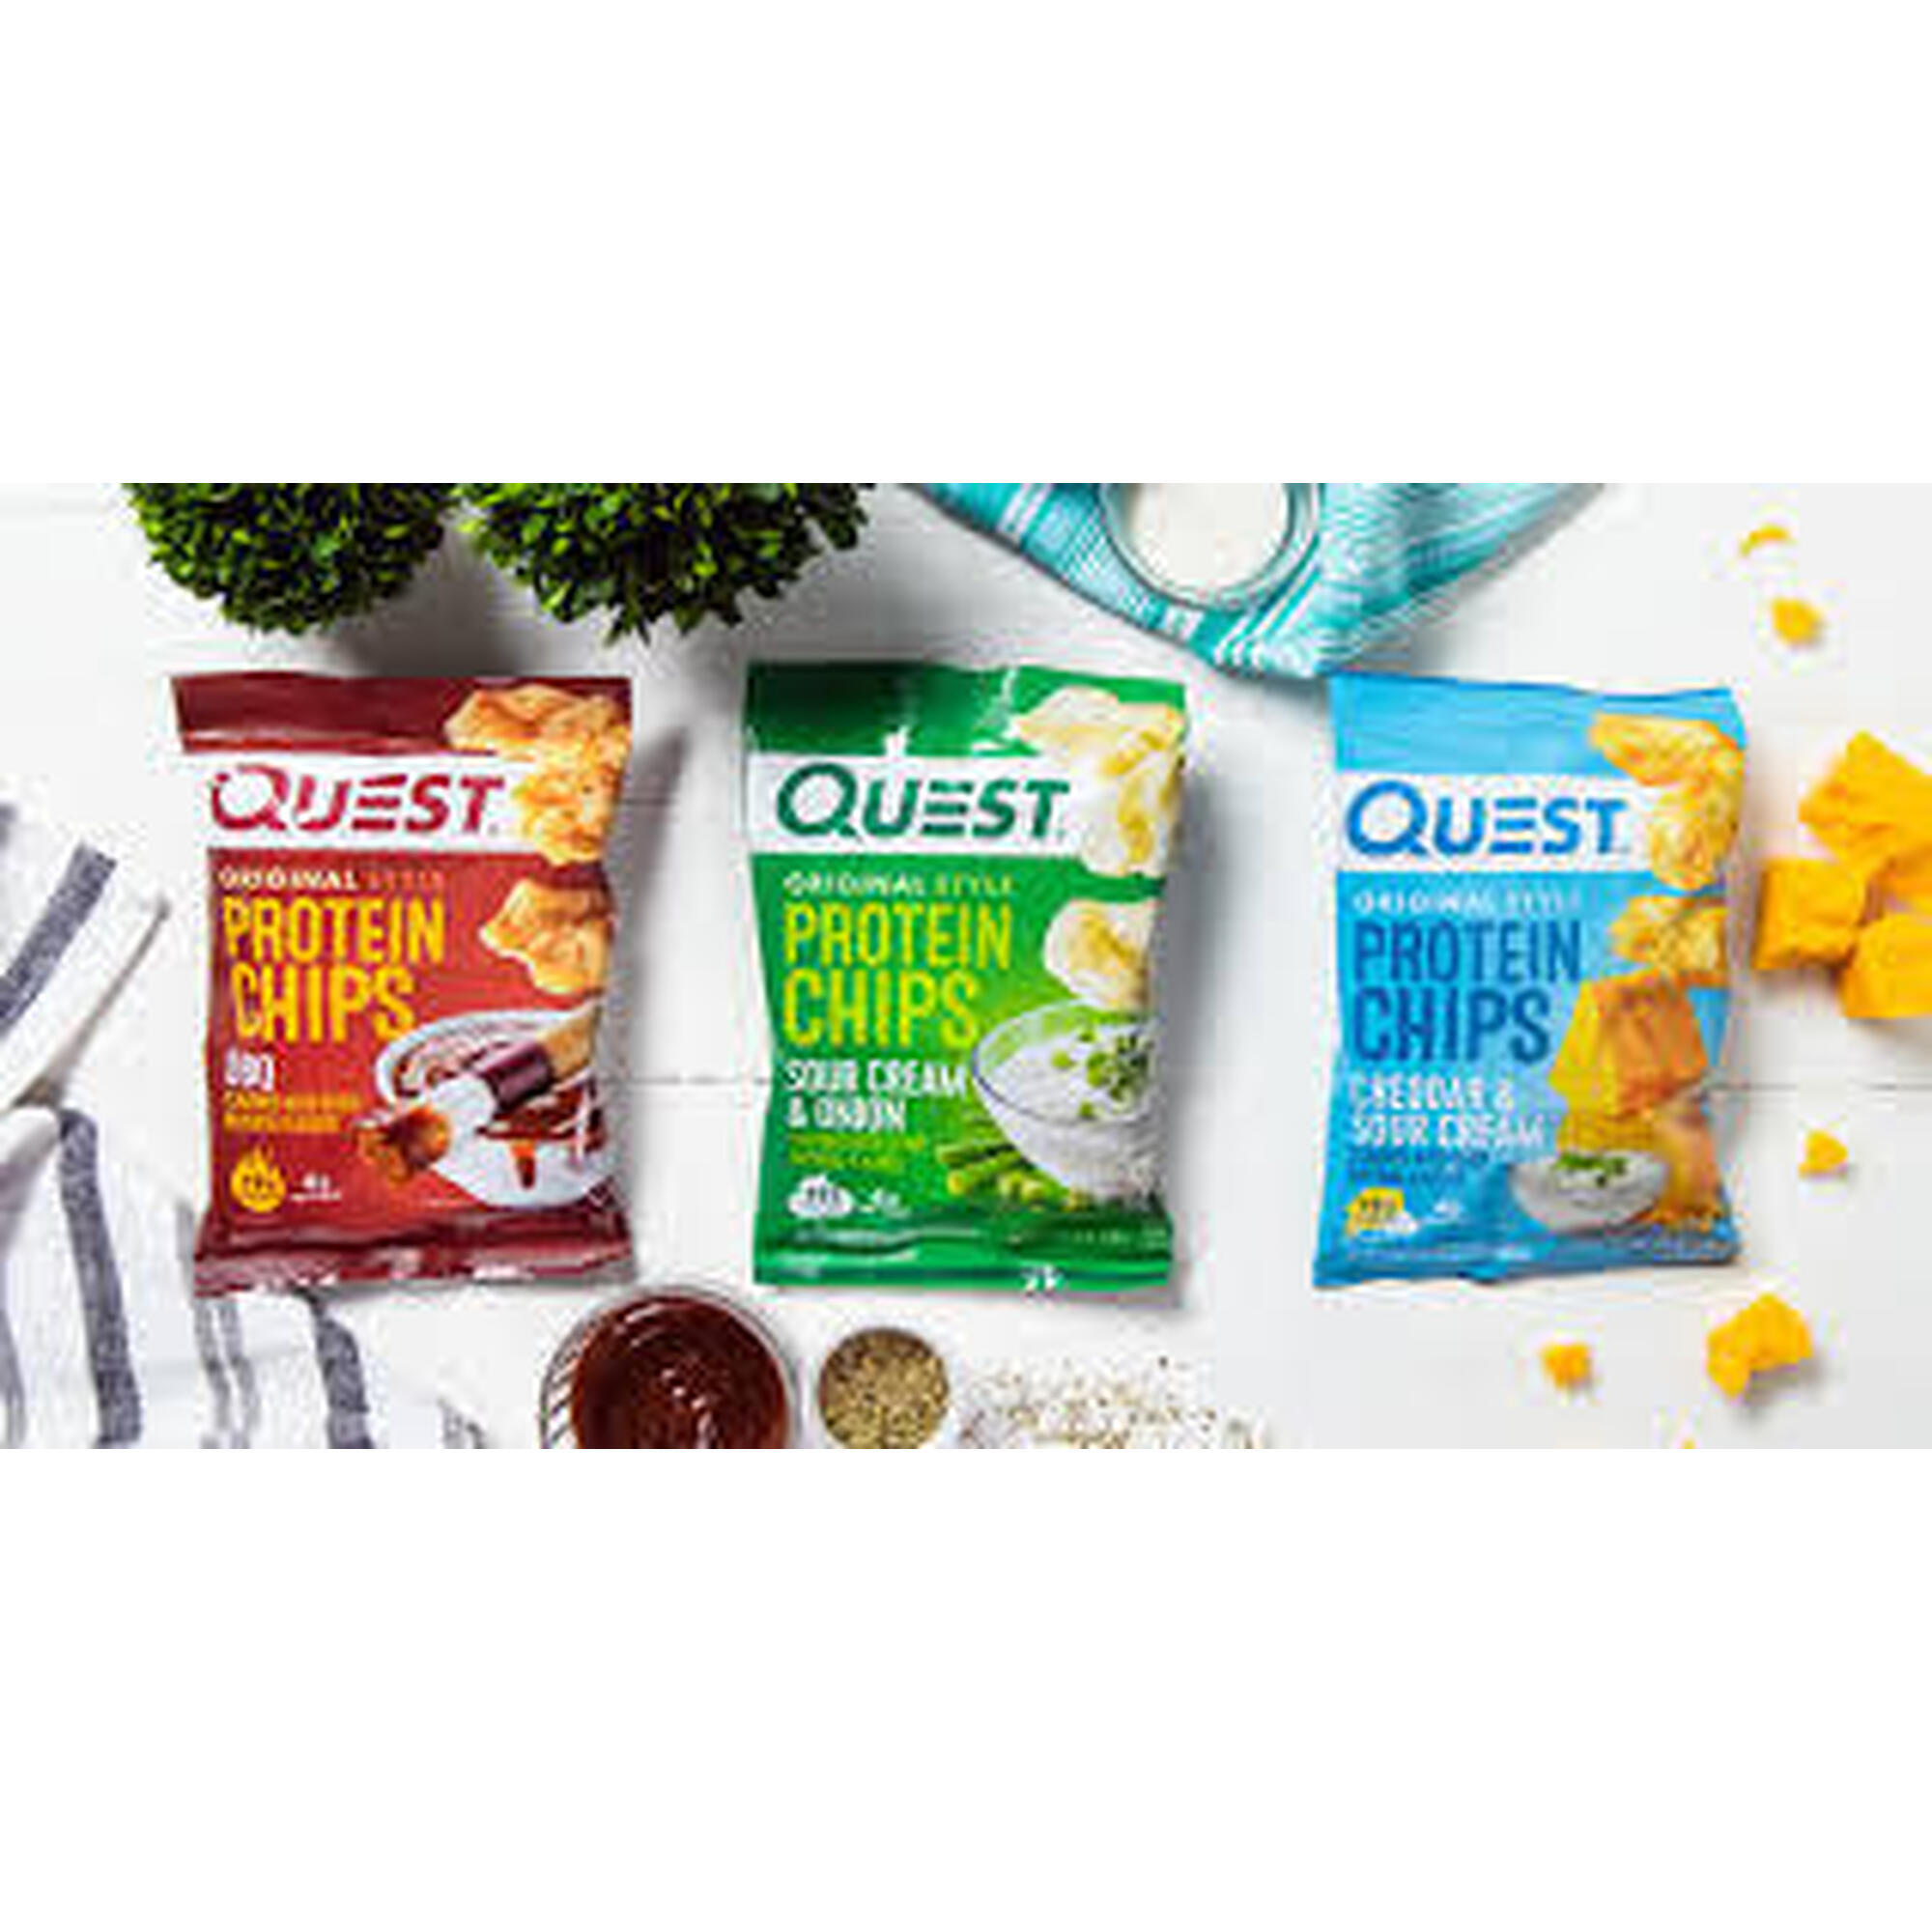 Quest Protein Chips - SPICY SWEET CHILI - TORTILLA STYLE 8 PACKS